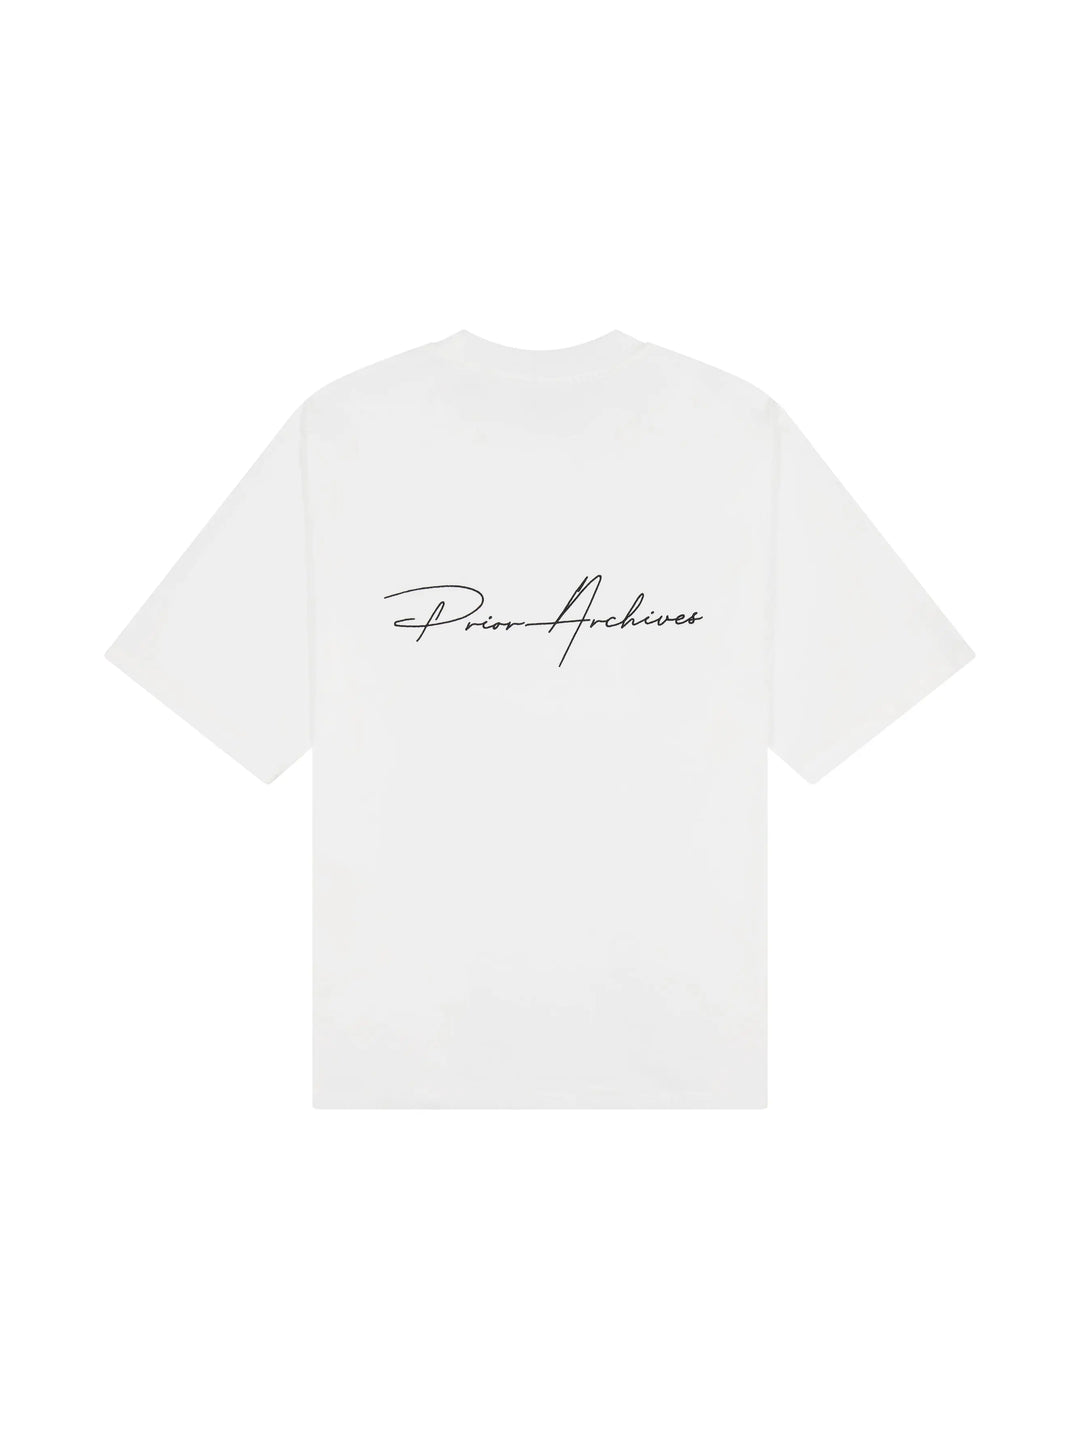 Prior Embroidery Logo Oversized T-shirt Fog 2.0 (New Sizing) in Melbourne, Australia - Prior